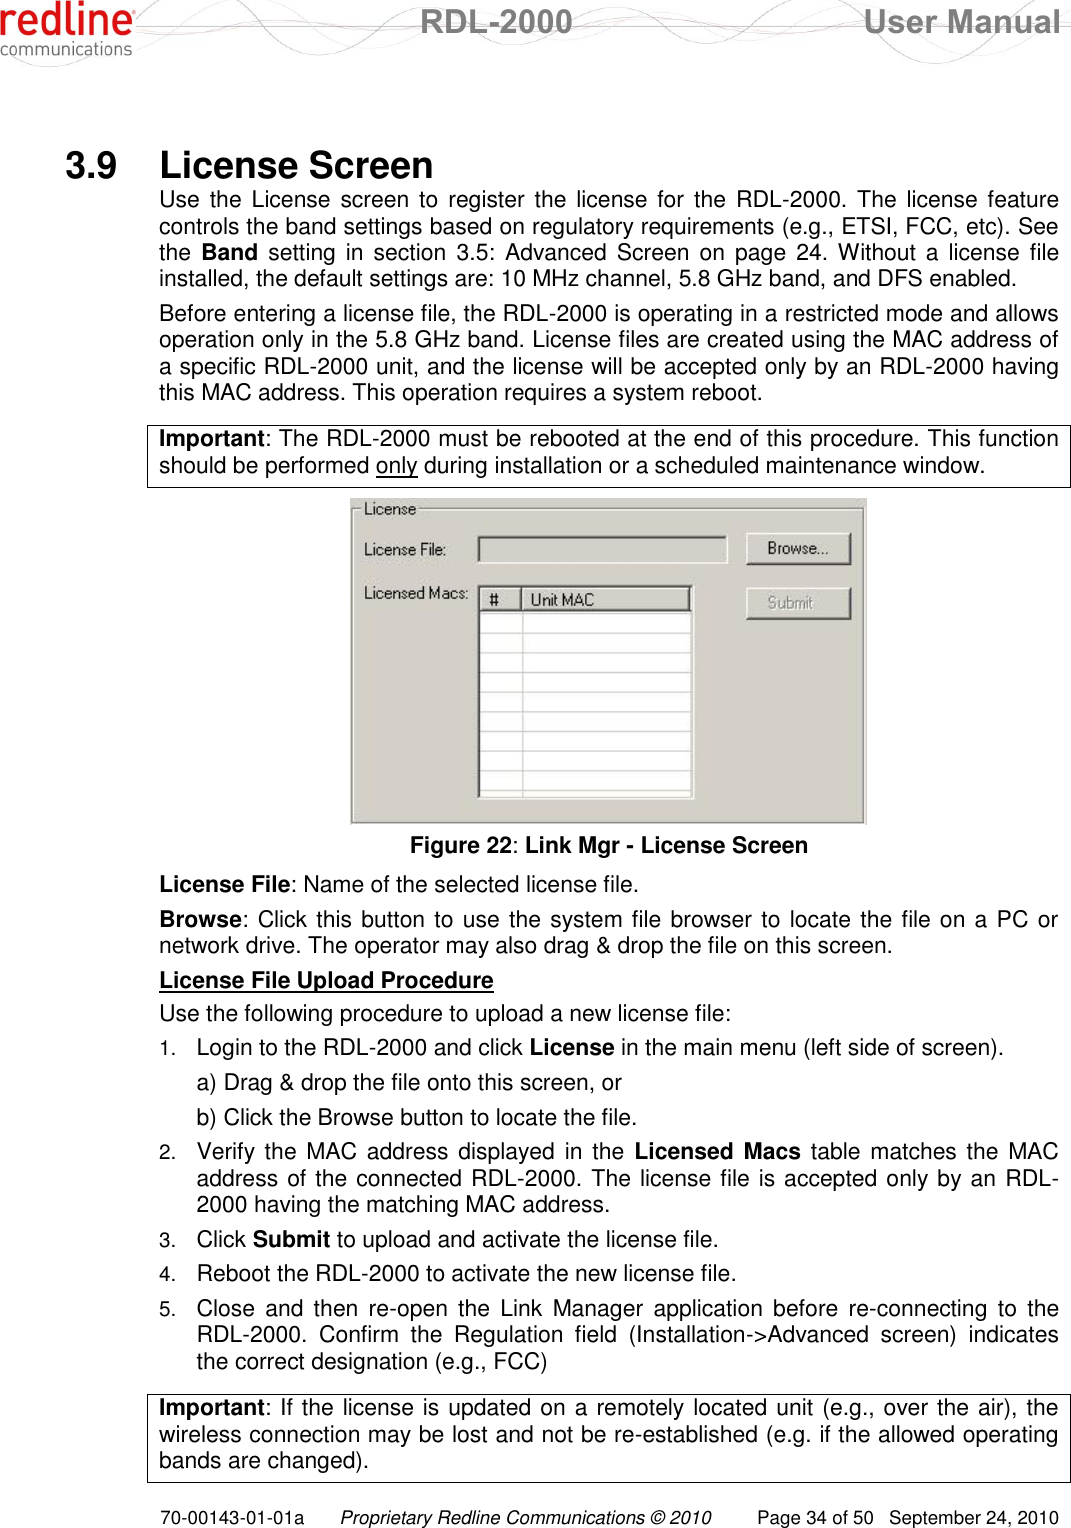  RDL-2000  User Manual 70-00143-01-01a Proprietary Redline Communications © 2010  Page 34 of 50  September 24, 2010    3.9  License Screen Use the License screen  to  register the license for the RDL-2000. The license feature controls the band settings based on regulatory requirements (e.g., ETSI, FCC, etc). See the  Band setting  in section 3.5: Advanced Screen on page  24. Without a  license file installed, the default settings are: 10 MHz channel, 5.8 GHz band, and DFS enabled. Before entering a license file, the RDL-2000 is operating in a restricted mode and allows operation only in the 5.8 GHz band. License files are created using the MAC address of a specific RDL-2000 unit, and the license will be accepted only by an RDL-2000 having this MAC address. This operation requires a system reboot.  Important: The RDL-2000 must be rebooted at the end of this procedure. This function should be performed only during installation or a scheduled maintenance window.    Figure 22: Link Mgr - License Screen License File: Name of the selected license file.  Browse: Click this button to use the system file browser to locate the file on a PC or network drive. The operator may also drag &amp; drop the file on this screen. License File Upload Procedure Use the following procedure to upload a new license file: 1. Login to the RDL-2000 and click License in the main menu (left side of screen).   a) Drag &amp; drop the file onto this screen, or   b) Click the Browse button to locate the file. 2. Verify the  MAC address displayed  in the Licensed Macs table matches  the MAC address of the connected RDL-2000. The license file is accepted only by an RDL-2000 having the matching MAC address. 3. Click Submit to upload and activate the license file. 4. Reboot the RDL-2000 to activate the new license file. 5. Close  and  then  re-open  the  Link  Manager  application  before  re-connecting  to  the RDL-2000.  Confirm  the  Regulation  field  (Installation-&gt;Advanced  screen)  indicates the correct designation (e.g., FCC)   Important: If the license is updated on a remotely located unit (e.g., over the air), the wireless connection may be lost and not be re-established (e.g. if the allowed operating bands are changed). 